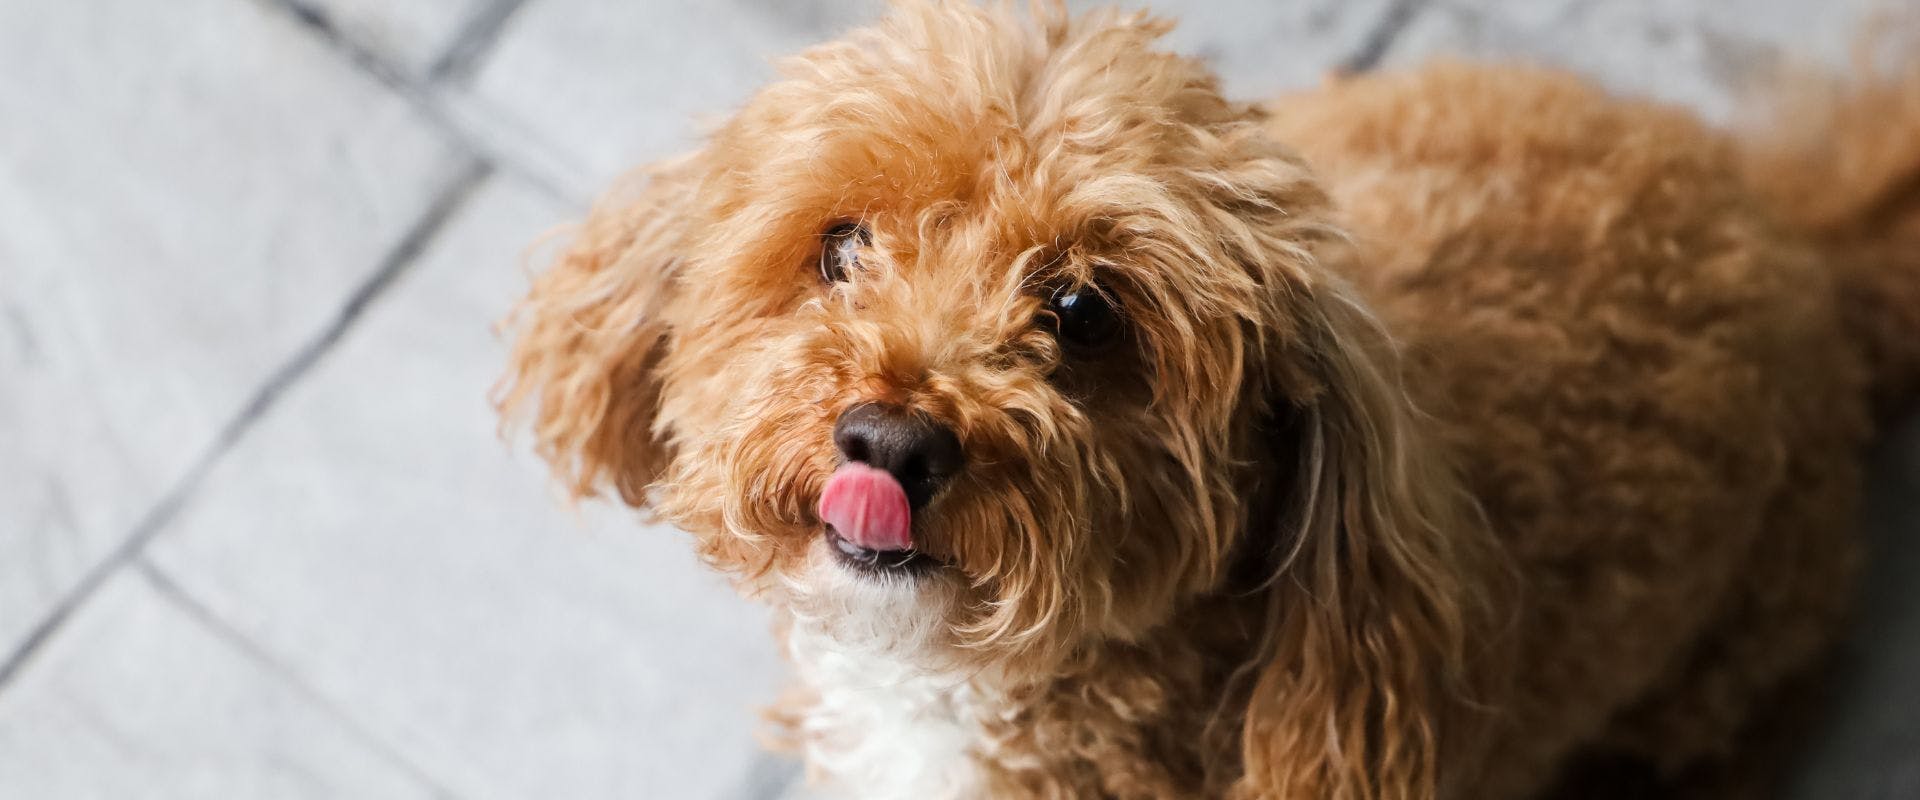 Small caramel-colored shaggy dog licking their lips